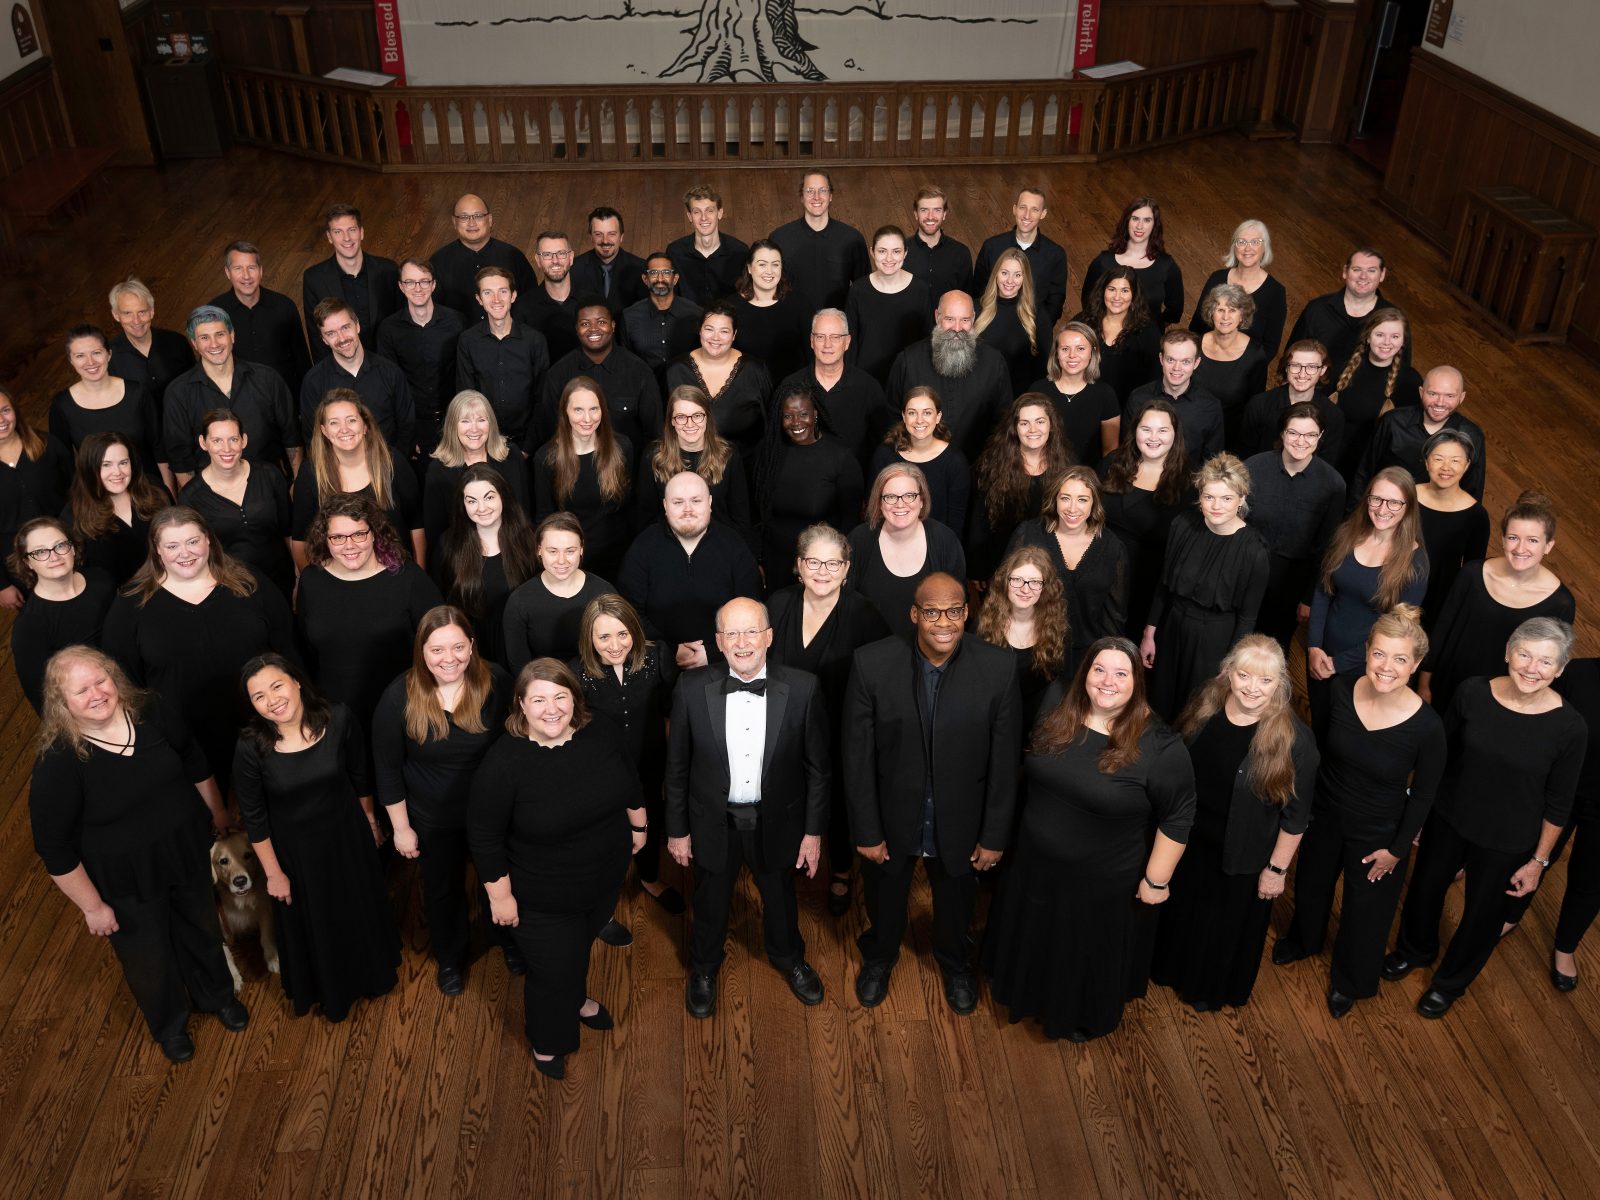 Concert VocalEssence and the St. Olaf Choir VocalEssence